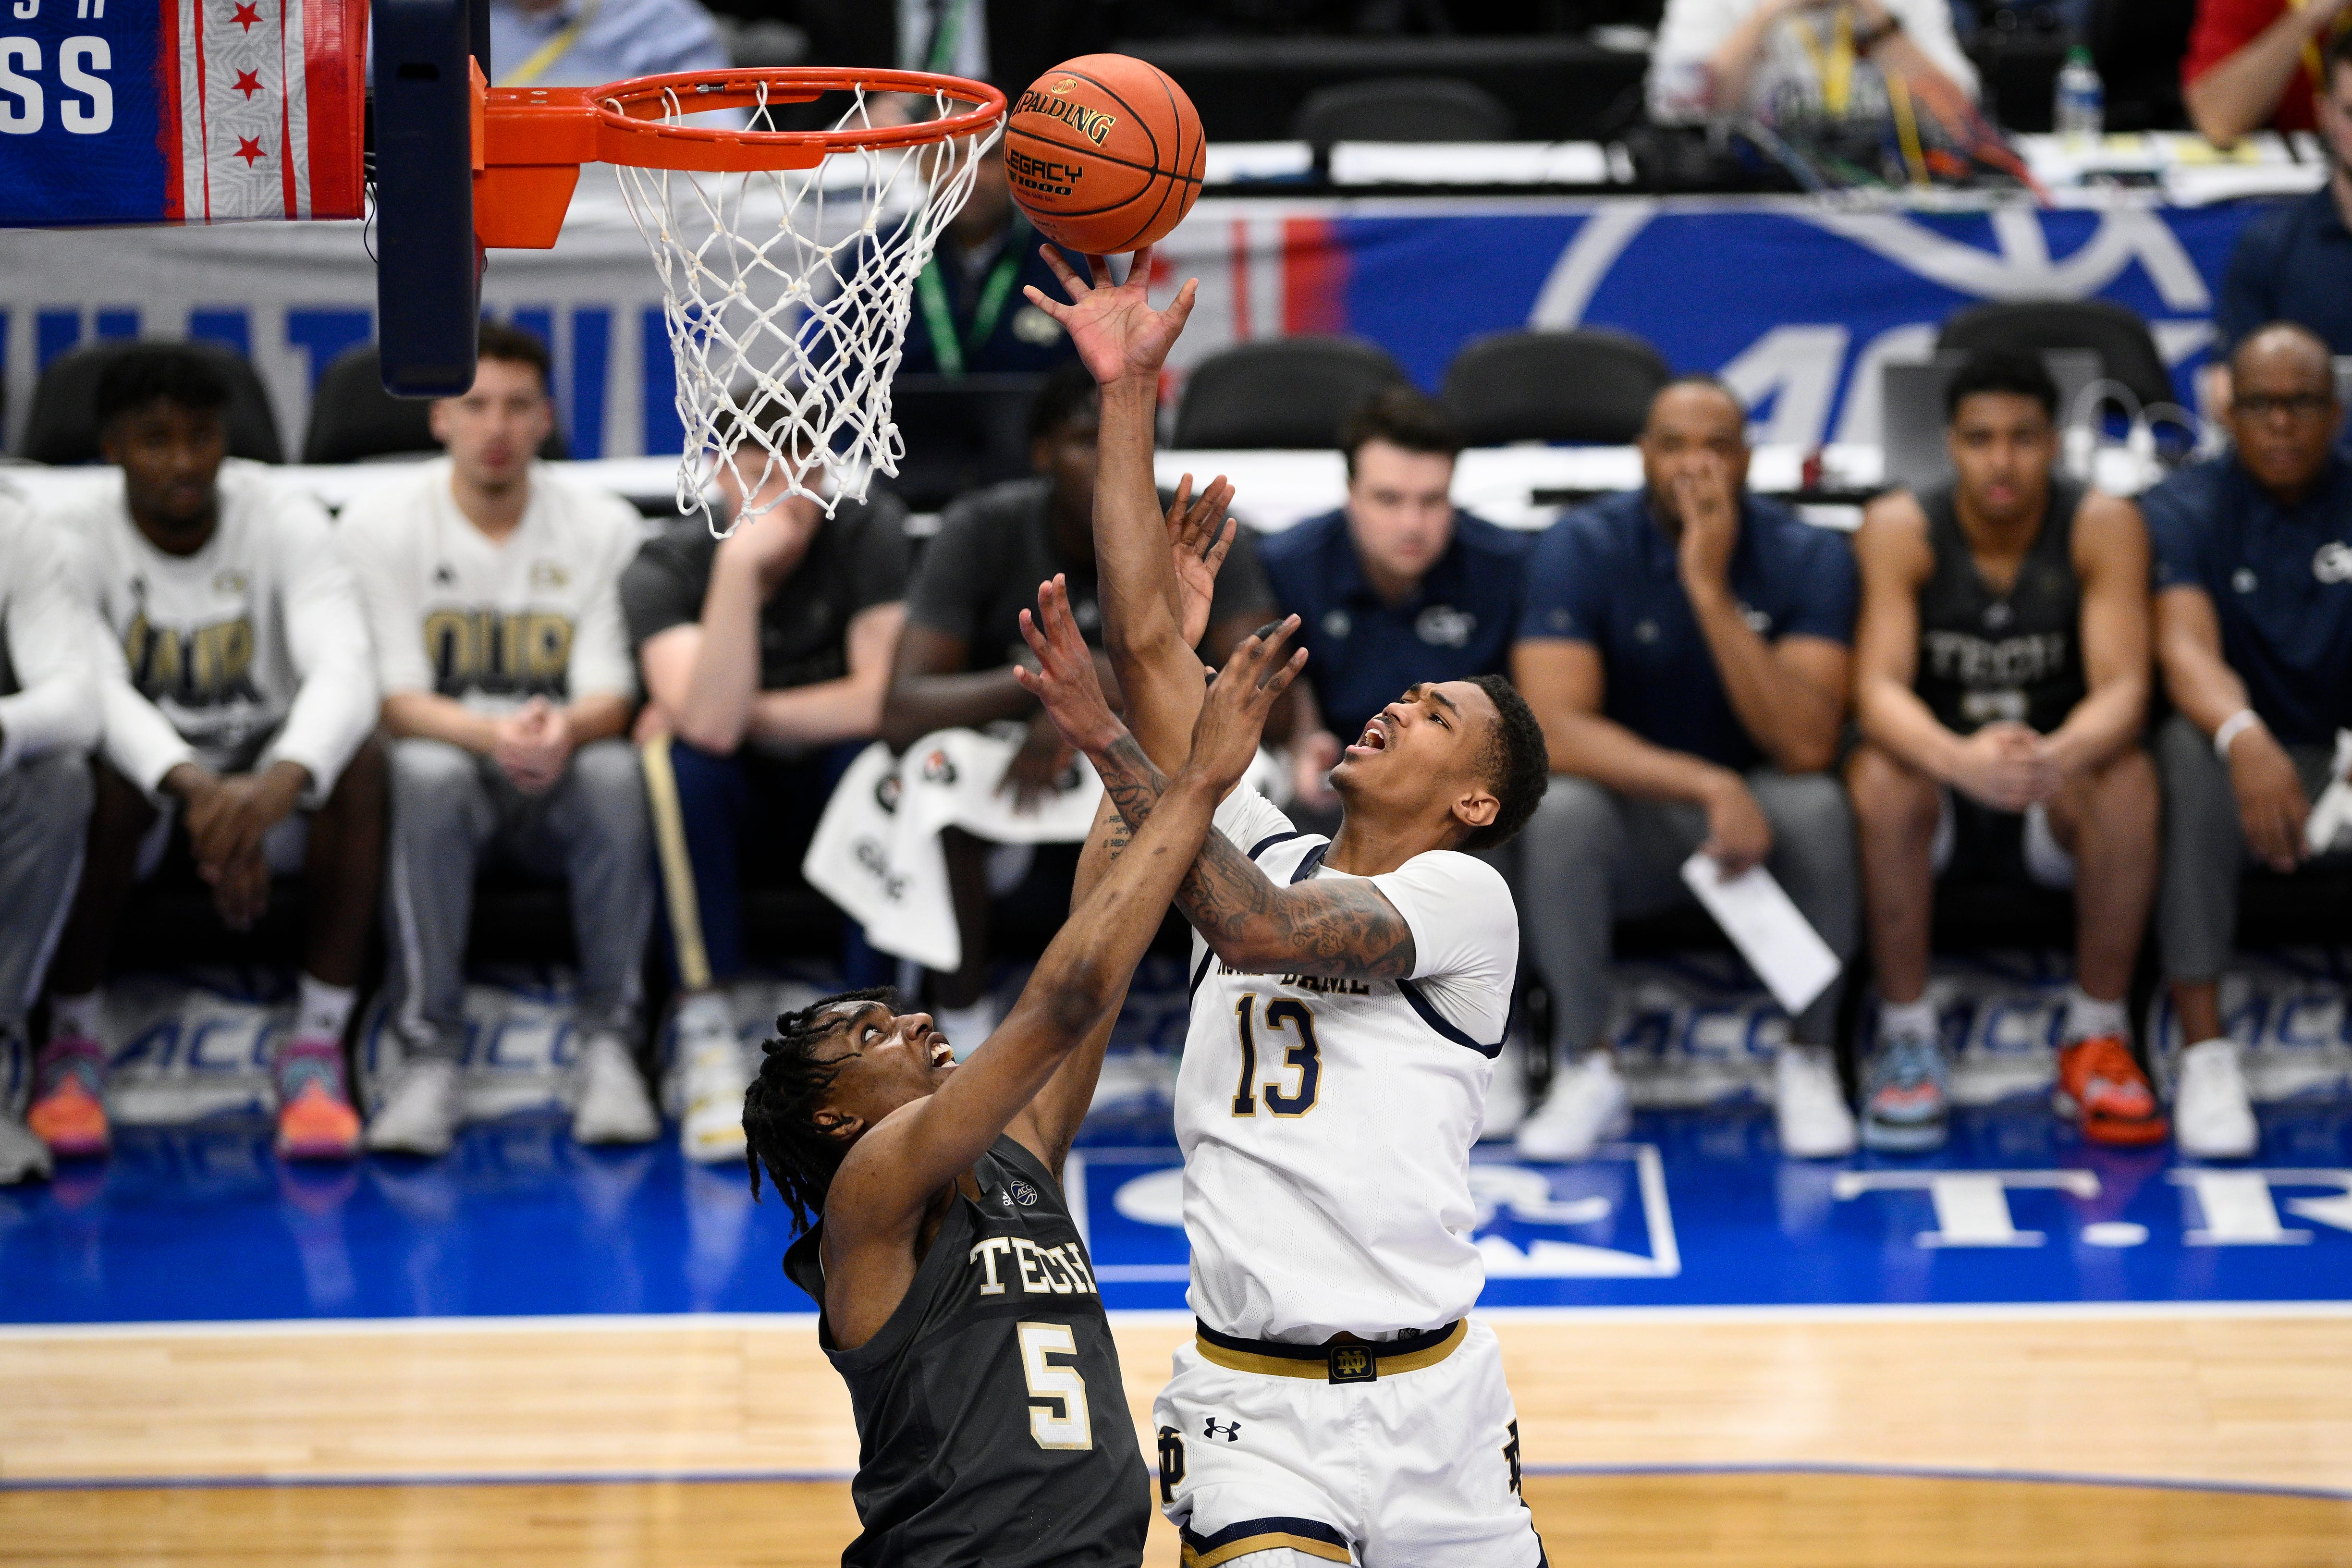 Notre Dame forward Tae Davis (13) drives to the basket against Georgia Tech forward Tafara Gapare (5) during the first half of the Atlantic Coast Conference NCAA college basketball tournament, Tuesday, March 12, 2024, in Washington. (AP Photo/Nick Wass)